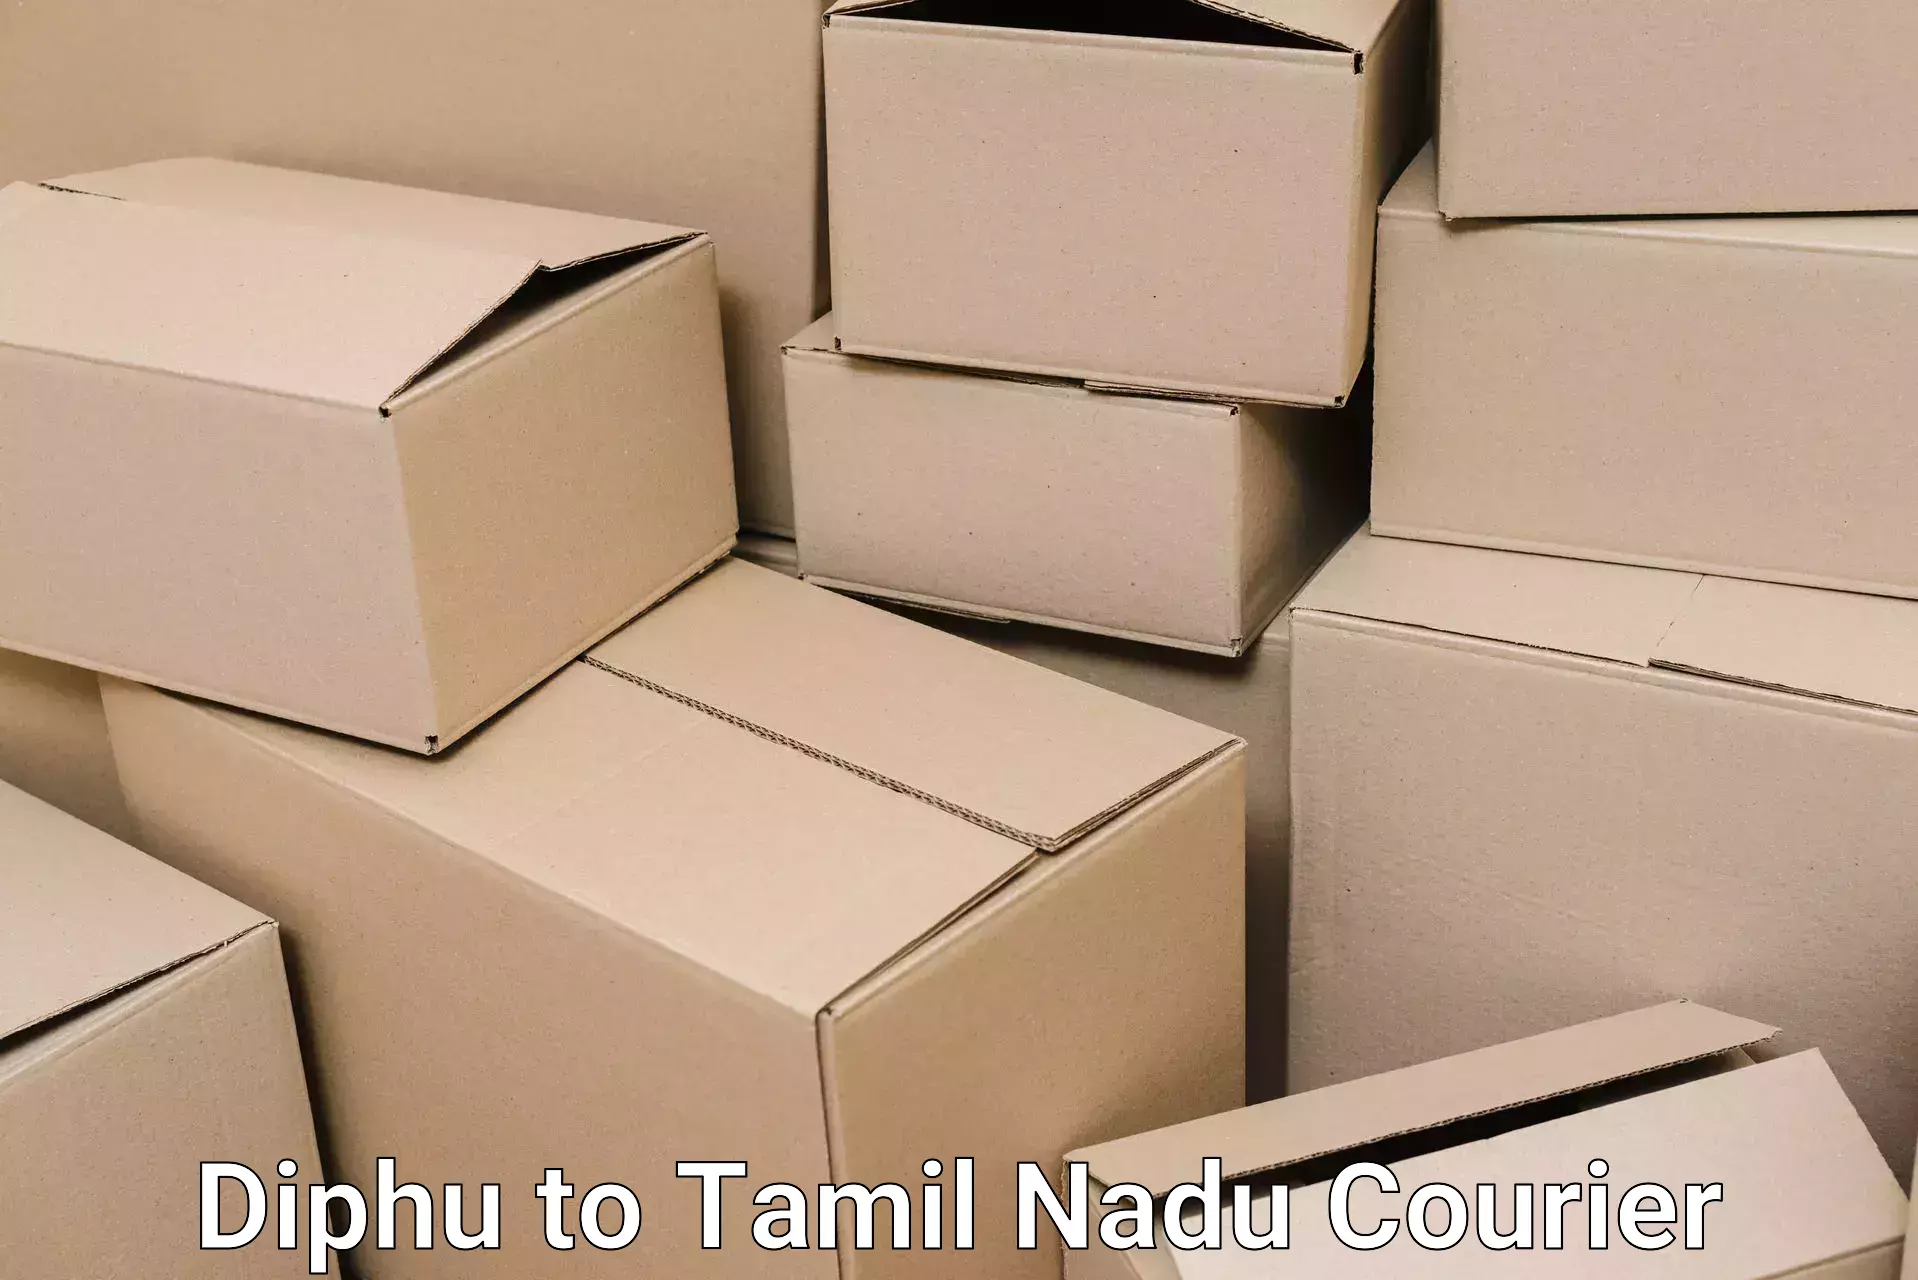 Efficient packing and moving Diphu to Tiruvallur